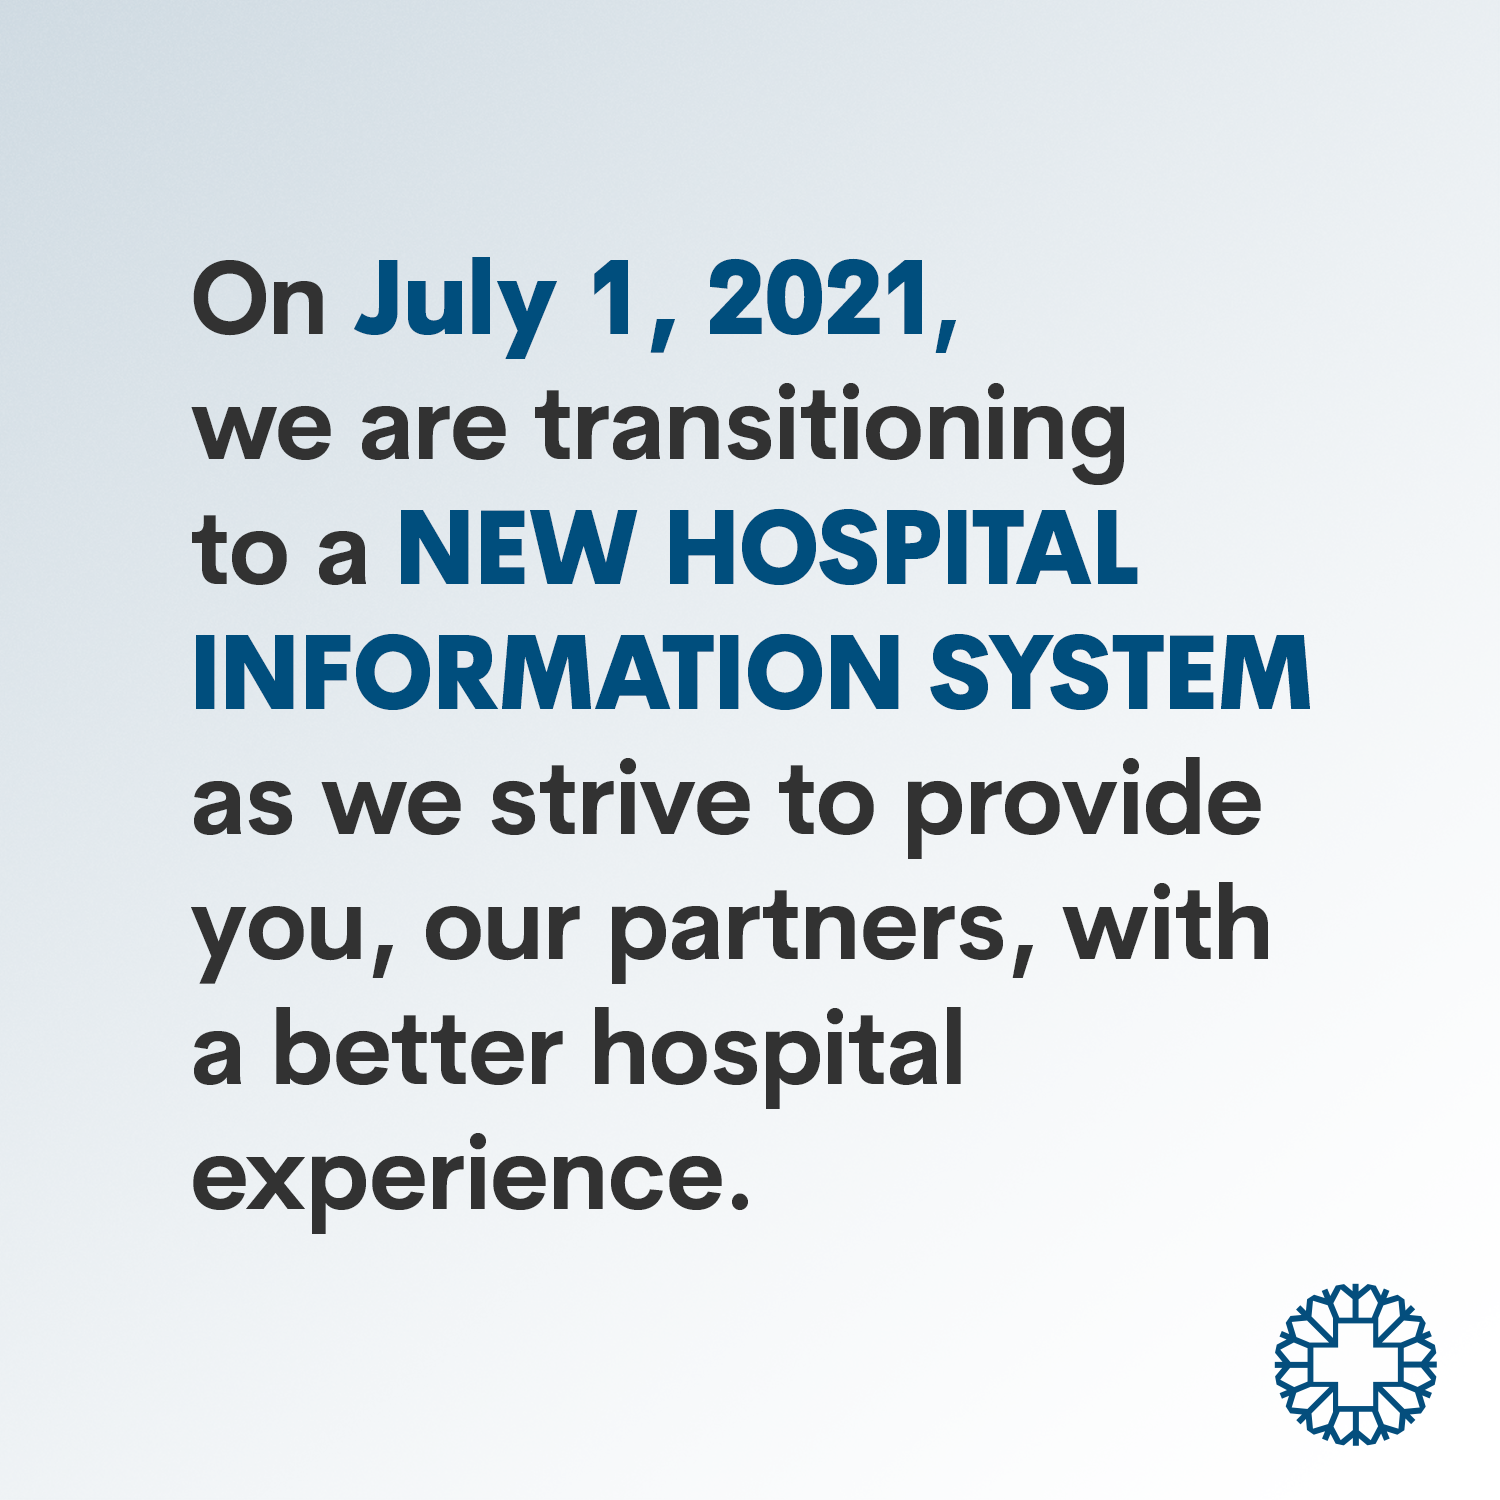 new hospital information system announcement